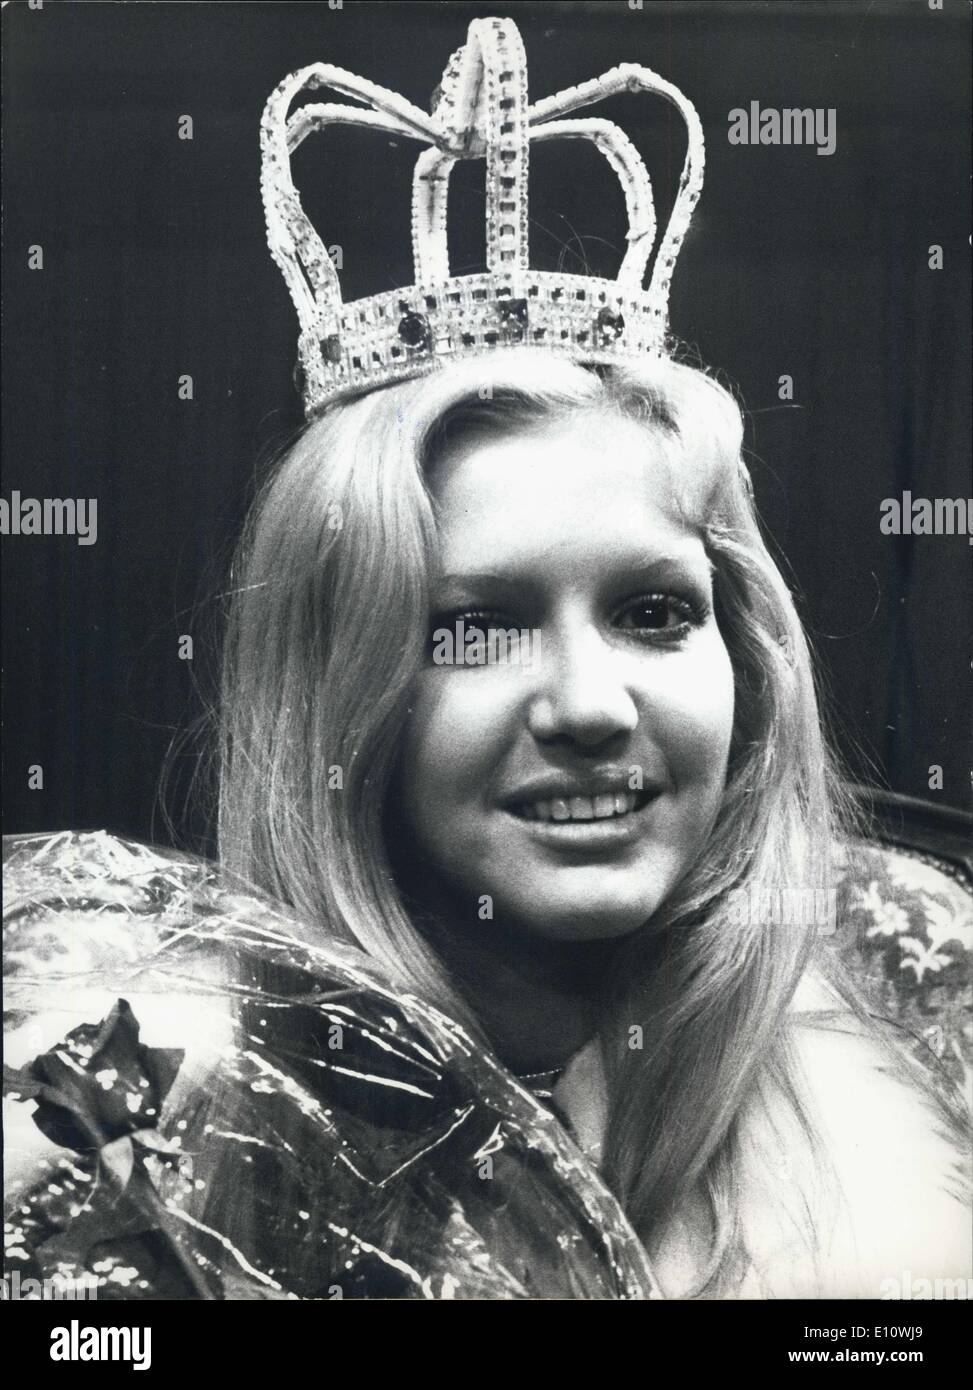 Apr. 25, 1974 - Miss Switzerland 1974: At the Bob Azam-Night Club in Geneva last night has been elected the ''Miss Switzerland 1974''. The beauty crown was assigned to the 20 years old Christine Lavanchy, mannequin from Lausanne. Stock Photo